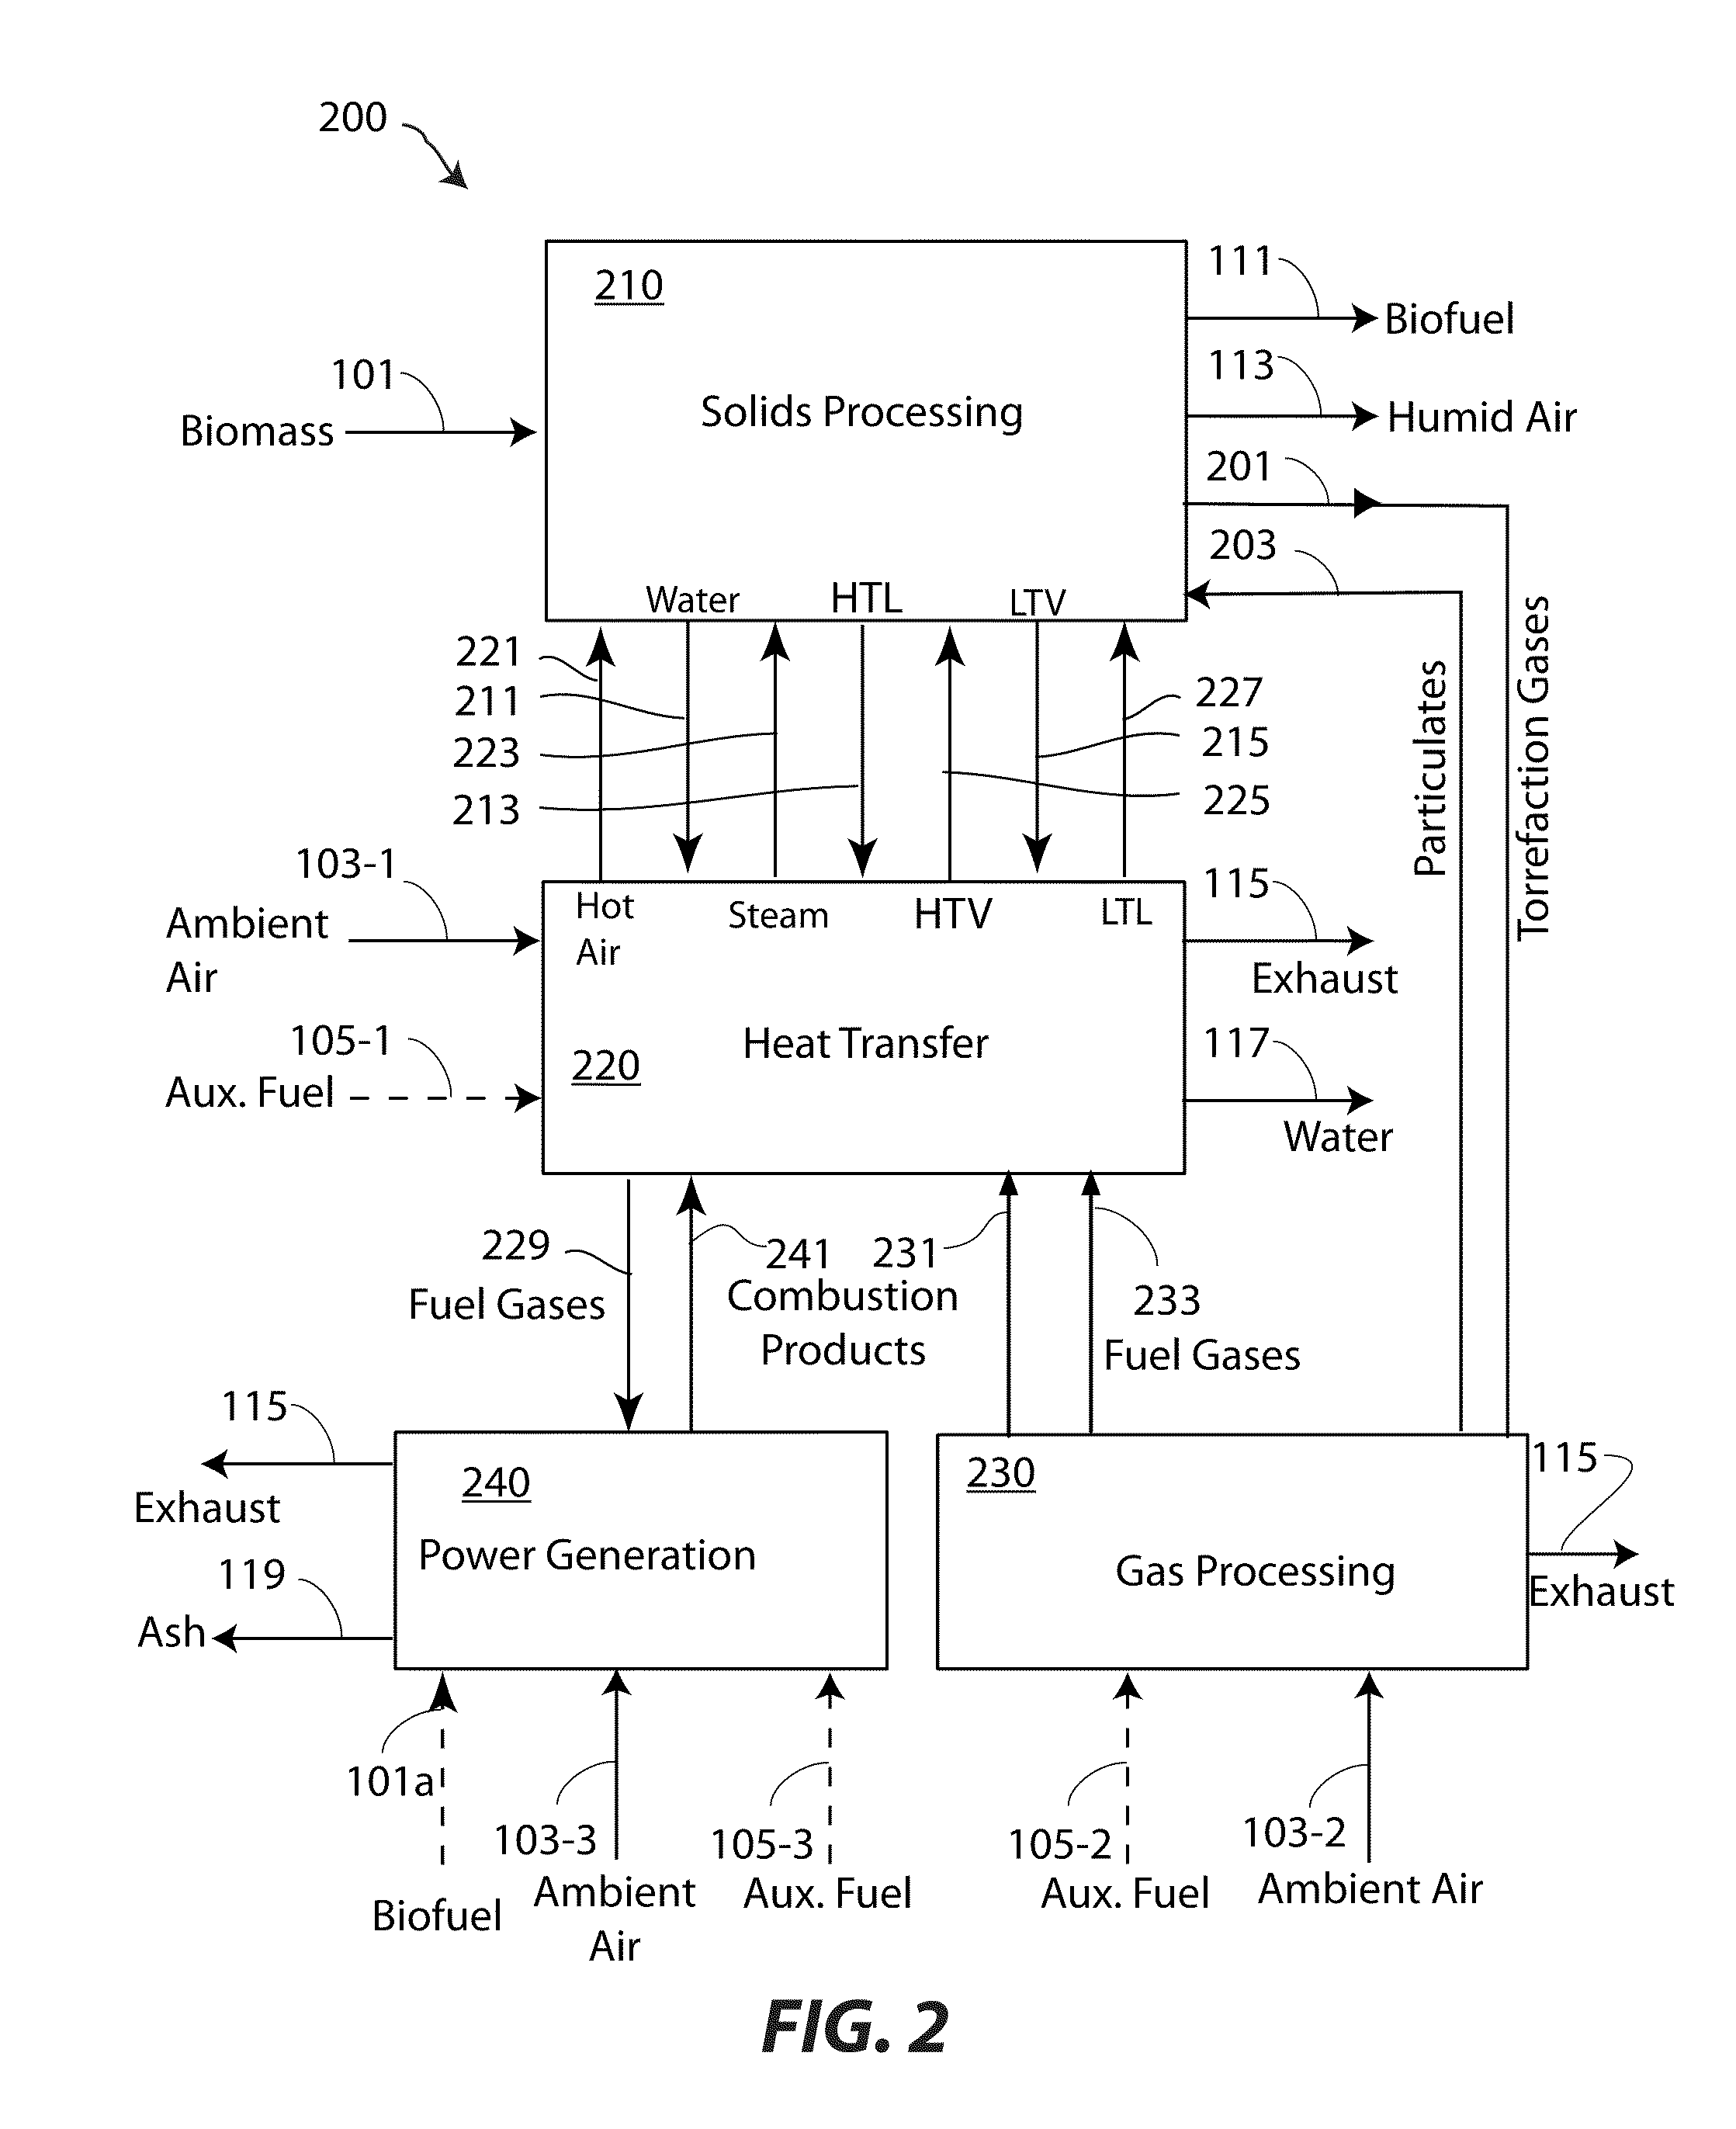 Method for conversion of biomass to biofuel